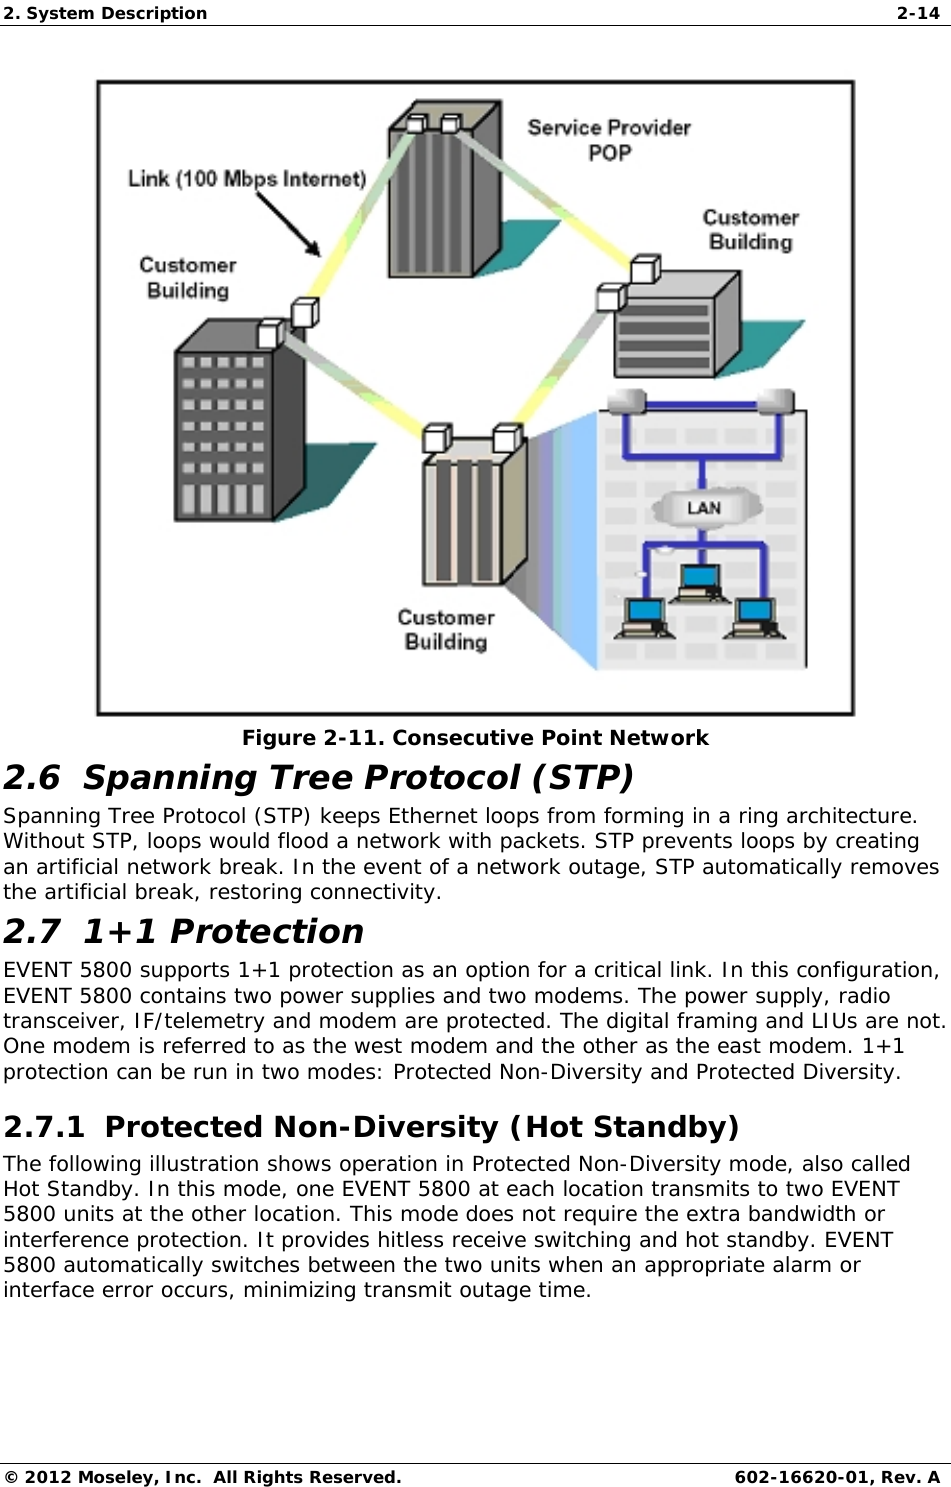 2. System Description  2-14 © 2012 Moseley, Inc.  All Rights Reserved.  602-16620-01, Rev. A  Figure 2-11. Consecutive Point Network 2.6  Spanning Tree Protocol (STP) Spanning Tree Protocol (STP) keeps Ethernet loops from forming in a ring architecture. Without STP, loops would flood a network with packets. STP prevents loops by creating an artificial network break. In the event of a network outage, STP automatically removes the artificial break, restoring connectivity. 2.7  1+1 Protection EVENT 5800 supports 1+1 protection as an option for a critical link. In this configuration, EVENT 5800 contains two power supplies and two modems. The power supply, radio transceiver, IF/telemetry and modem are protected. The digital framing and LIUs are not. One modem is referred to as the west modem and the other as the east modem. 1+1 protection can be run in two modes: Protected Non-Diversity and Protected Diversity.  2.7.1  Protected Non-Diversity (Hot Standby) The following illustration shows operation in Protected Non-Diversity mode, also called Hot Standby. In this mode, one EVENT 5800 at each location transmits to two EVENT 5800 units at the other location. This mode does not require the extra bandwidth or interference protection. It provides hitless receive switching and hot standby. EVENT 5800 automatically switches between the two units when an appropriate alarm or interface error occurs, minimizing transmit outage time. 